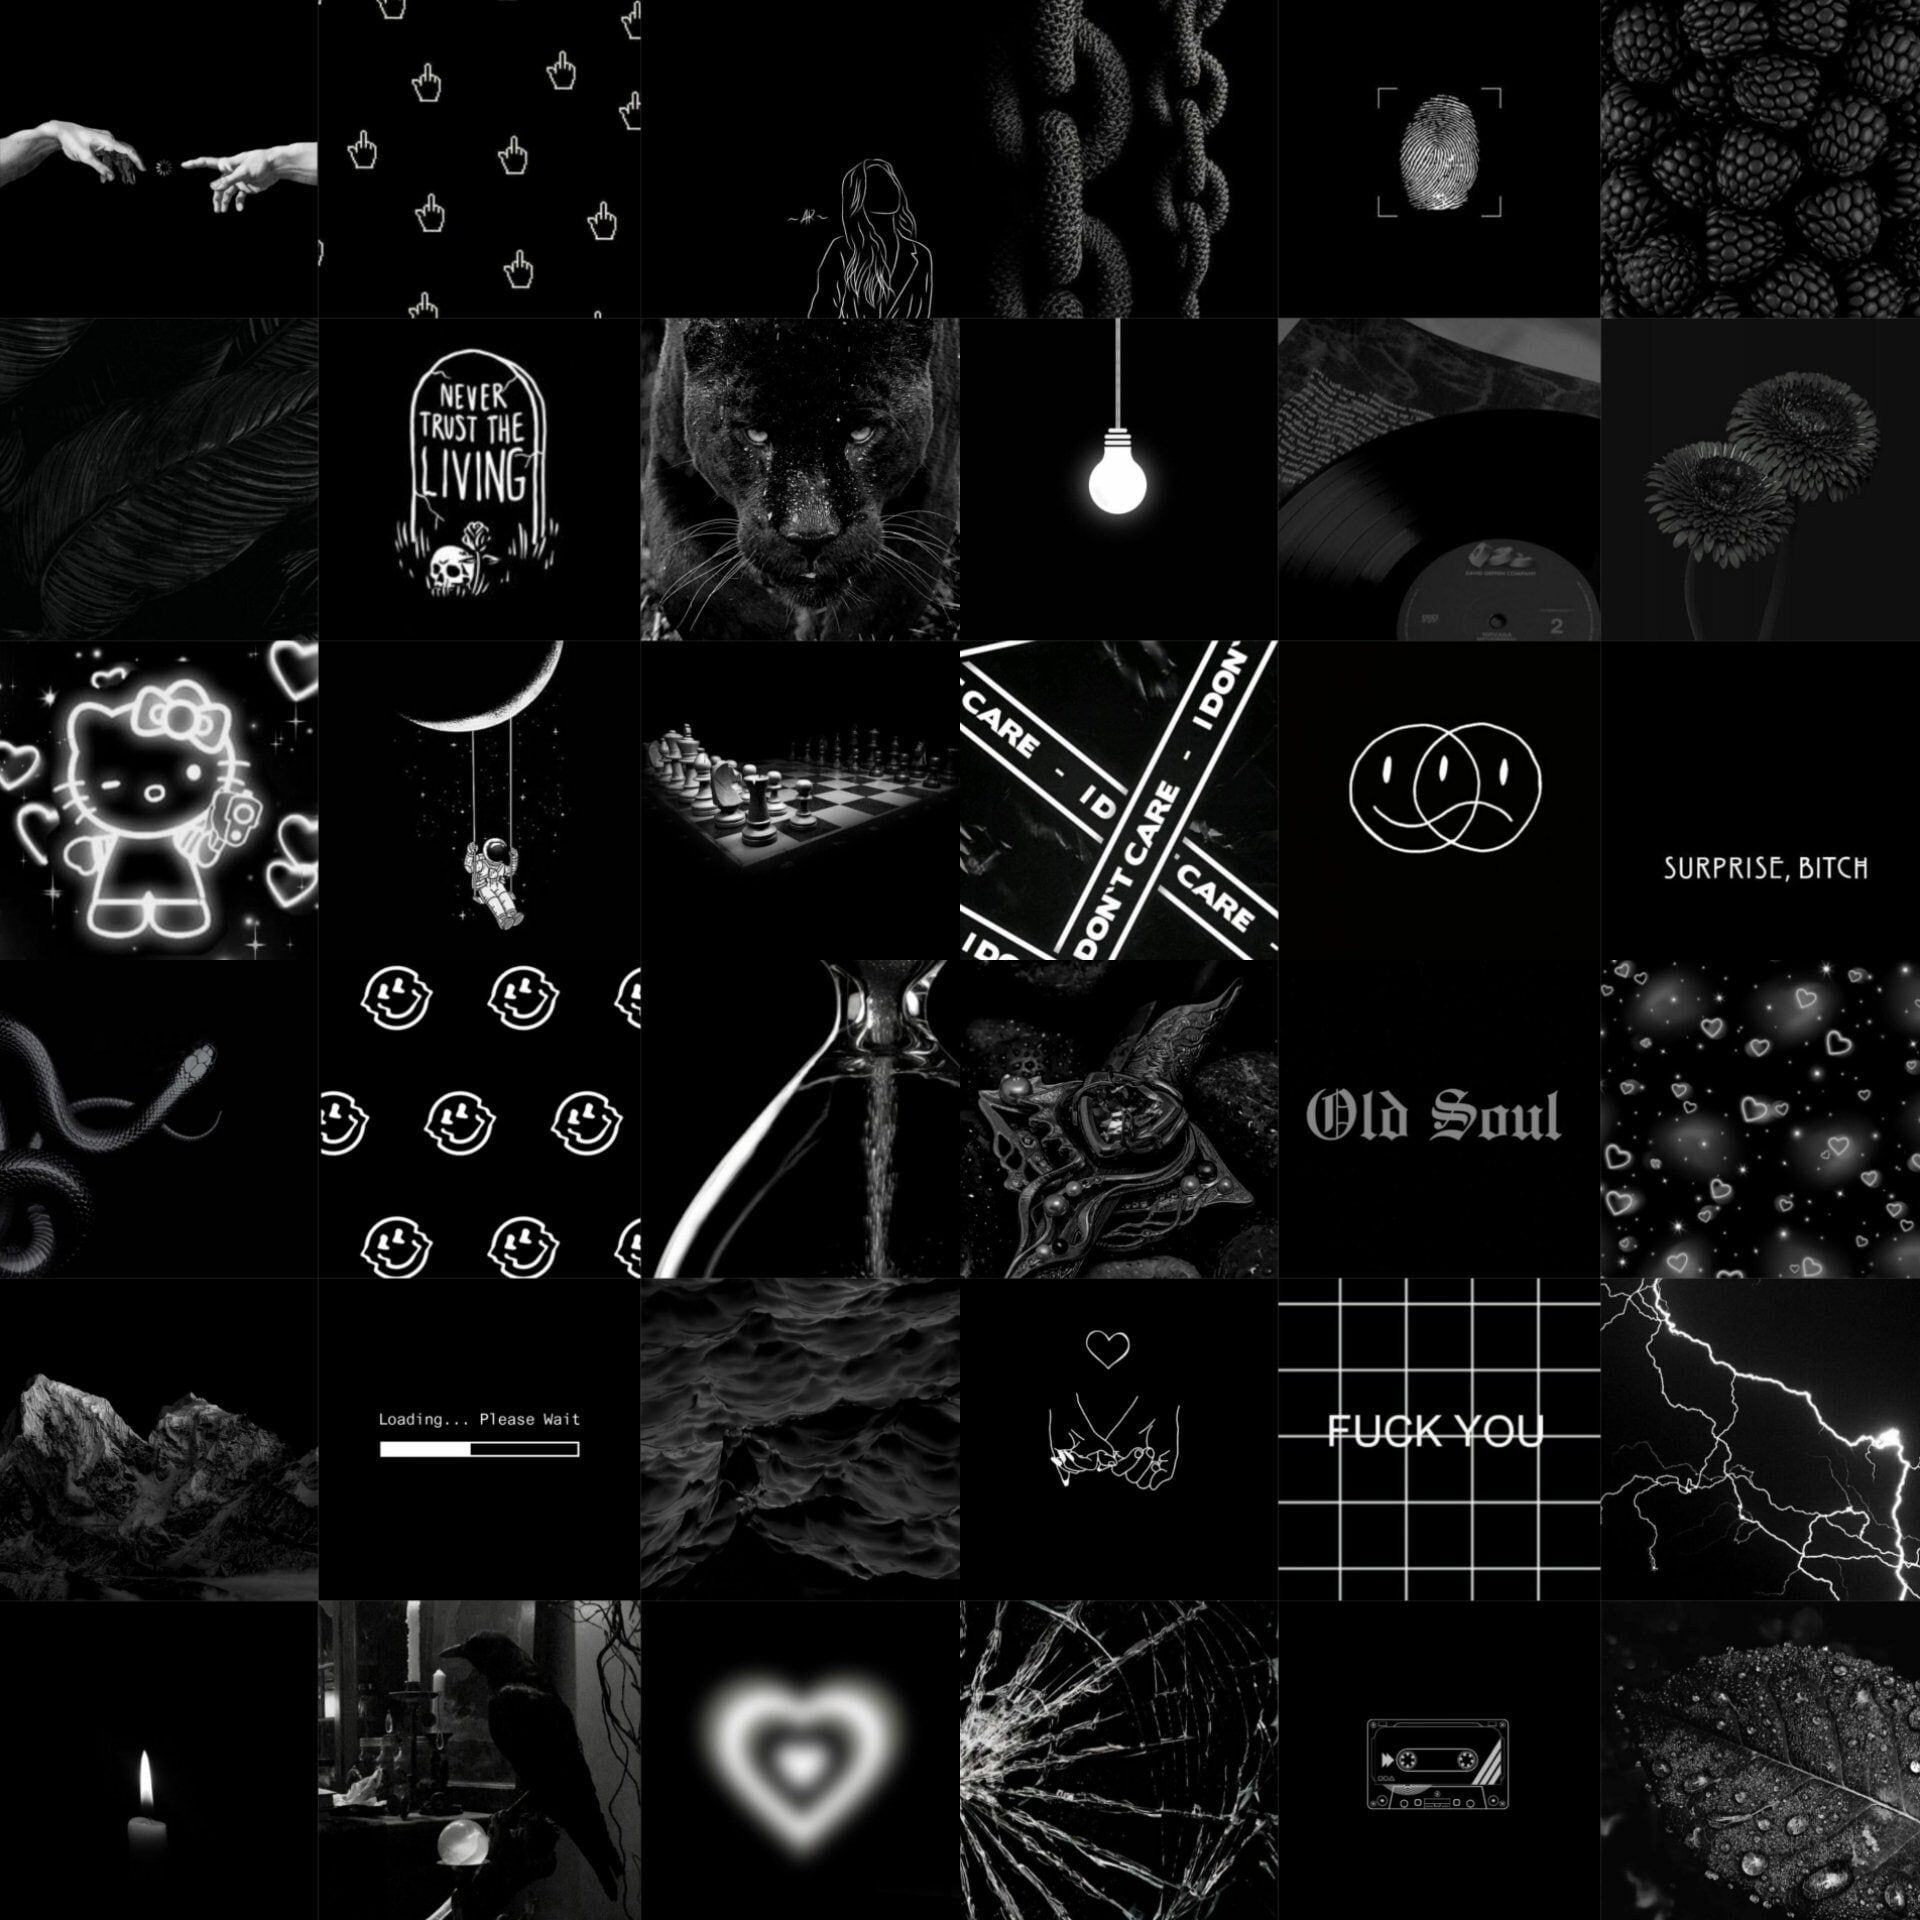 Black and white images of various things - Black, gothic, black and white, dark phone, punk